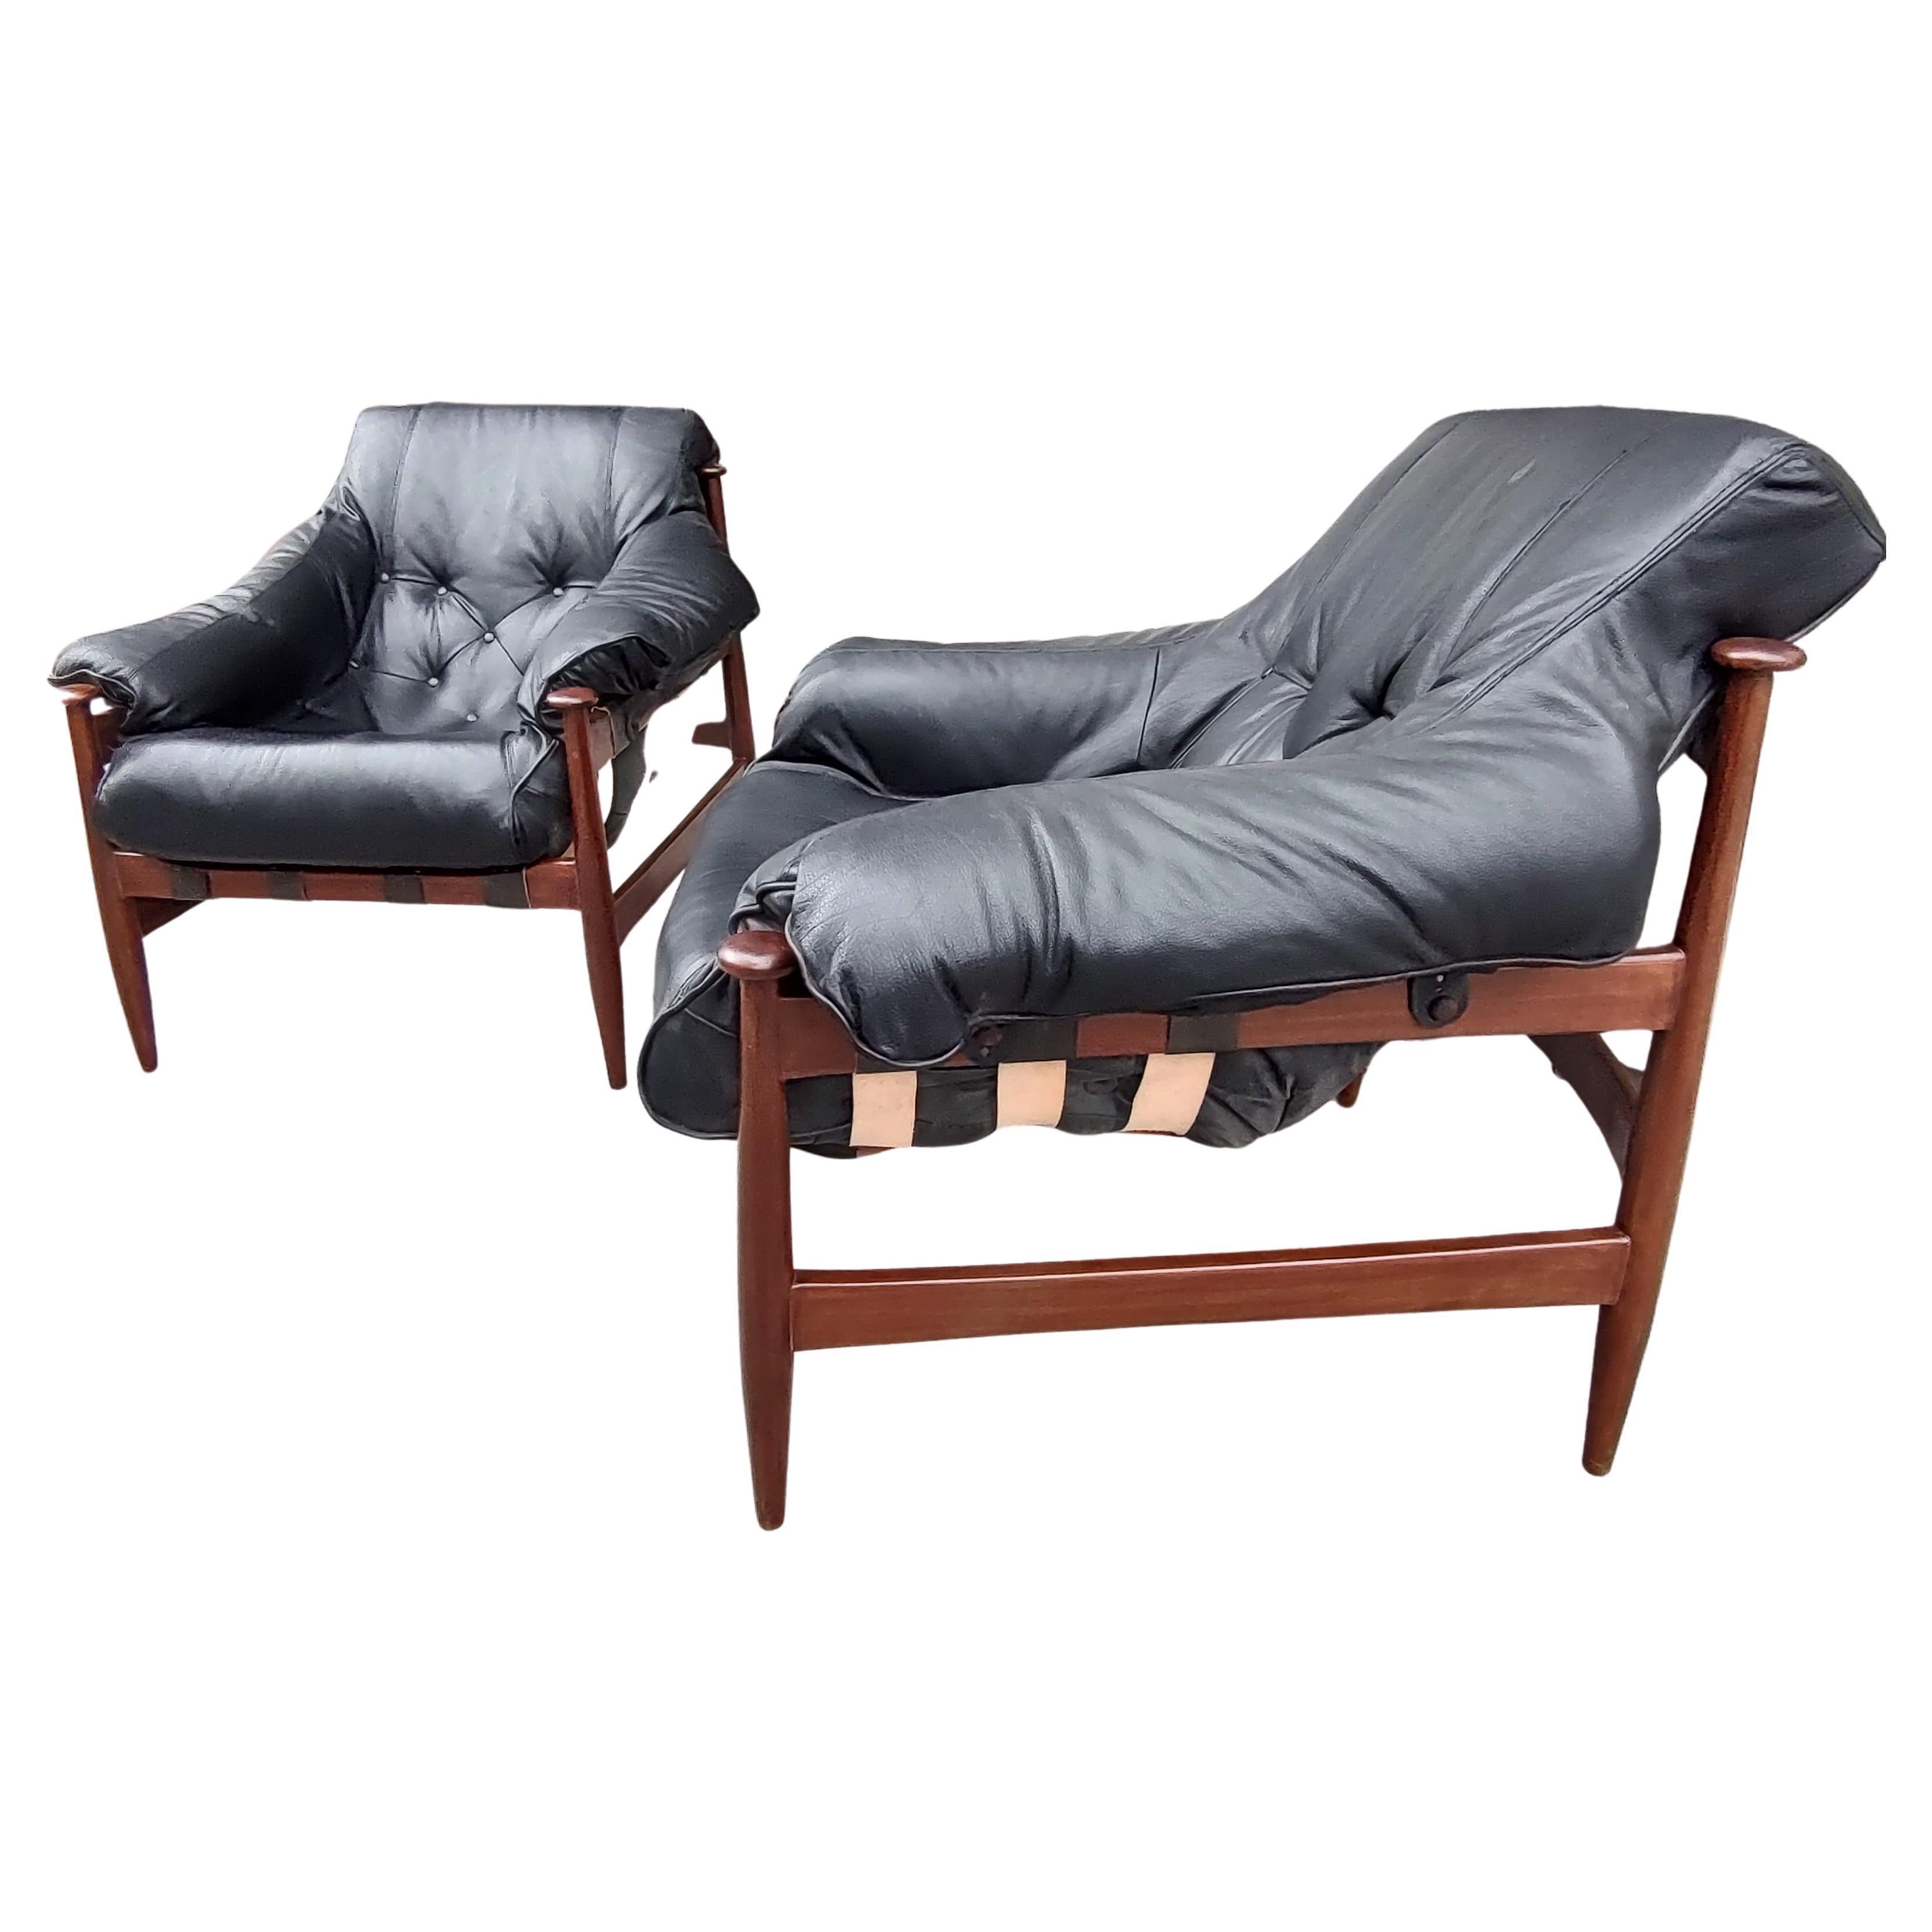 Pair of Mid Century Modern Sculptural Mahogany & Leather Lounge Chairs